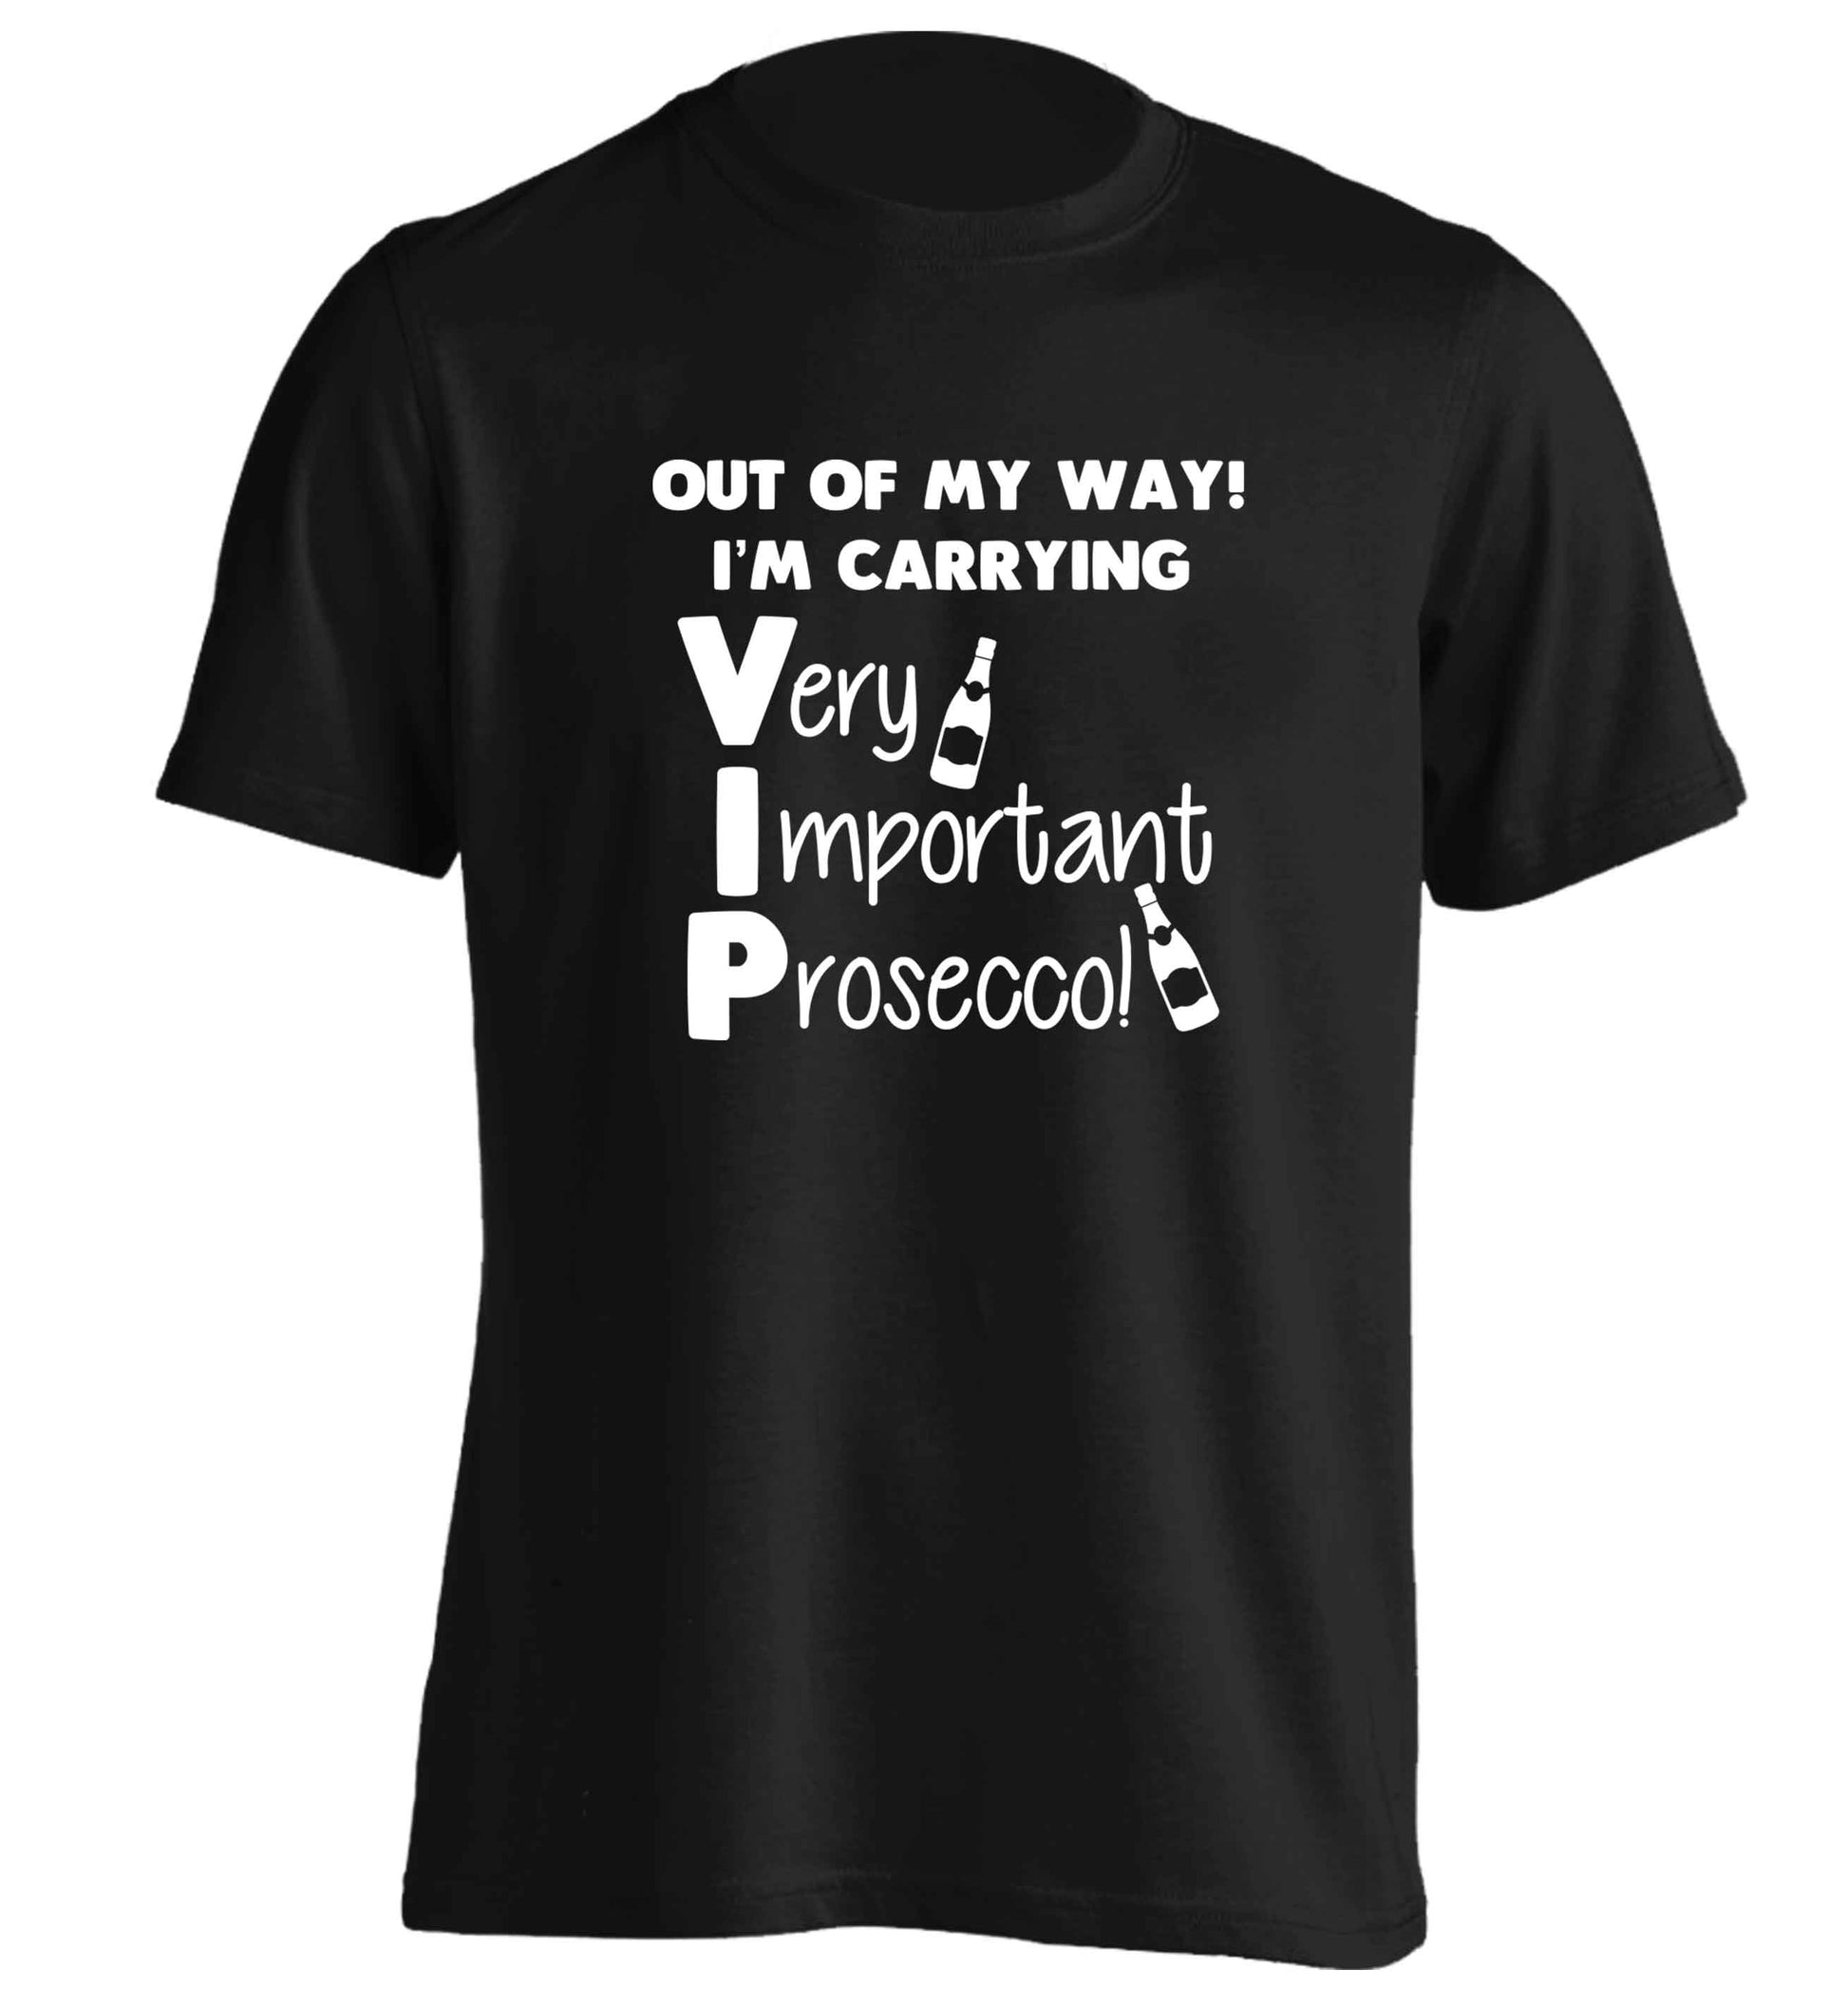 Out of my way I'm carrying very important prosecco! adults unisex black Tshirt 2XL